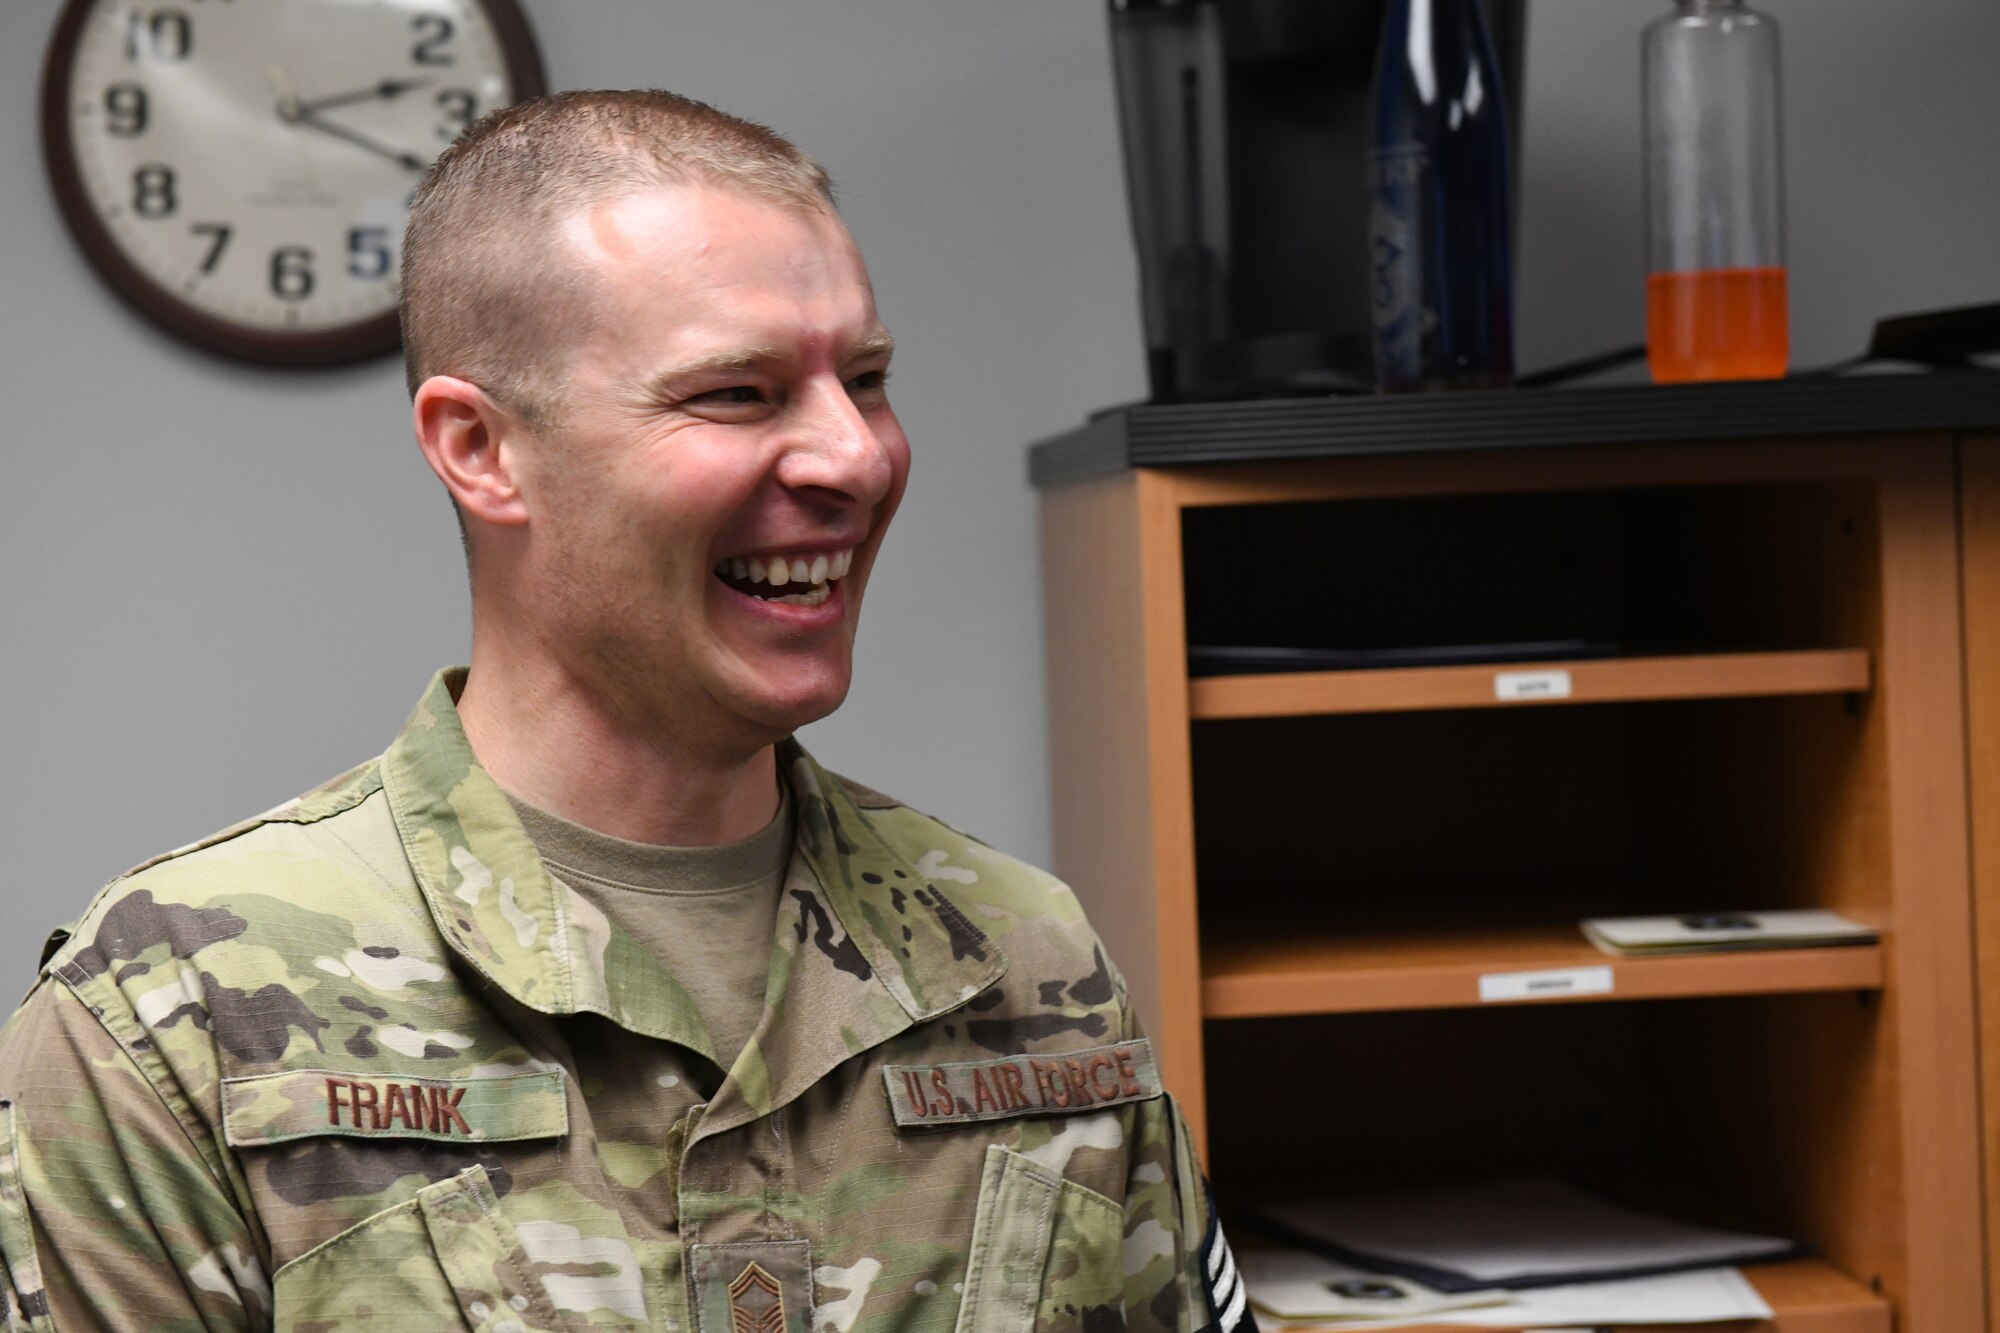 Senior Master Sgt. Jesse Frank, the 28th Security Forces Squadron operations superintendent, learns he has just been selected to become a chief master sergeant at Ellsworth Air Force Base, S.D., Dec. 4, 2018. Current 28th Bomb Wing chief master sergeants and base leadership traveled together to the 28th SFS to congratulate Frank for his achievement of making a rank that is held by only 1 percent of the Air Force. (U.S. Air Force photo by Airman 1st Class Thomas Karol)